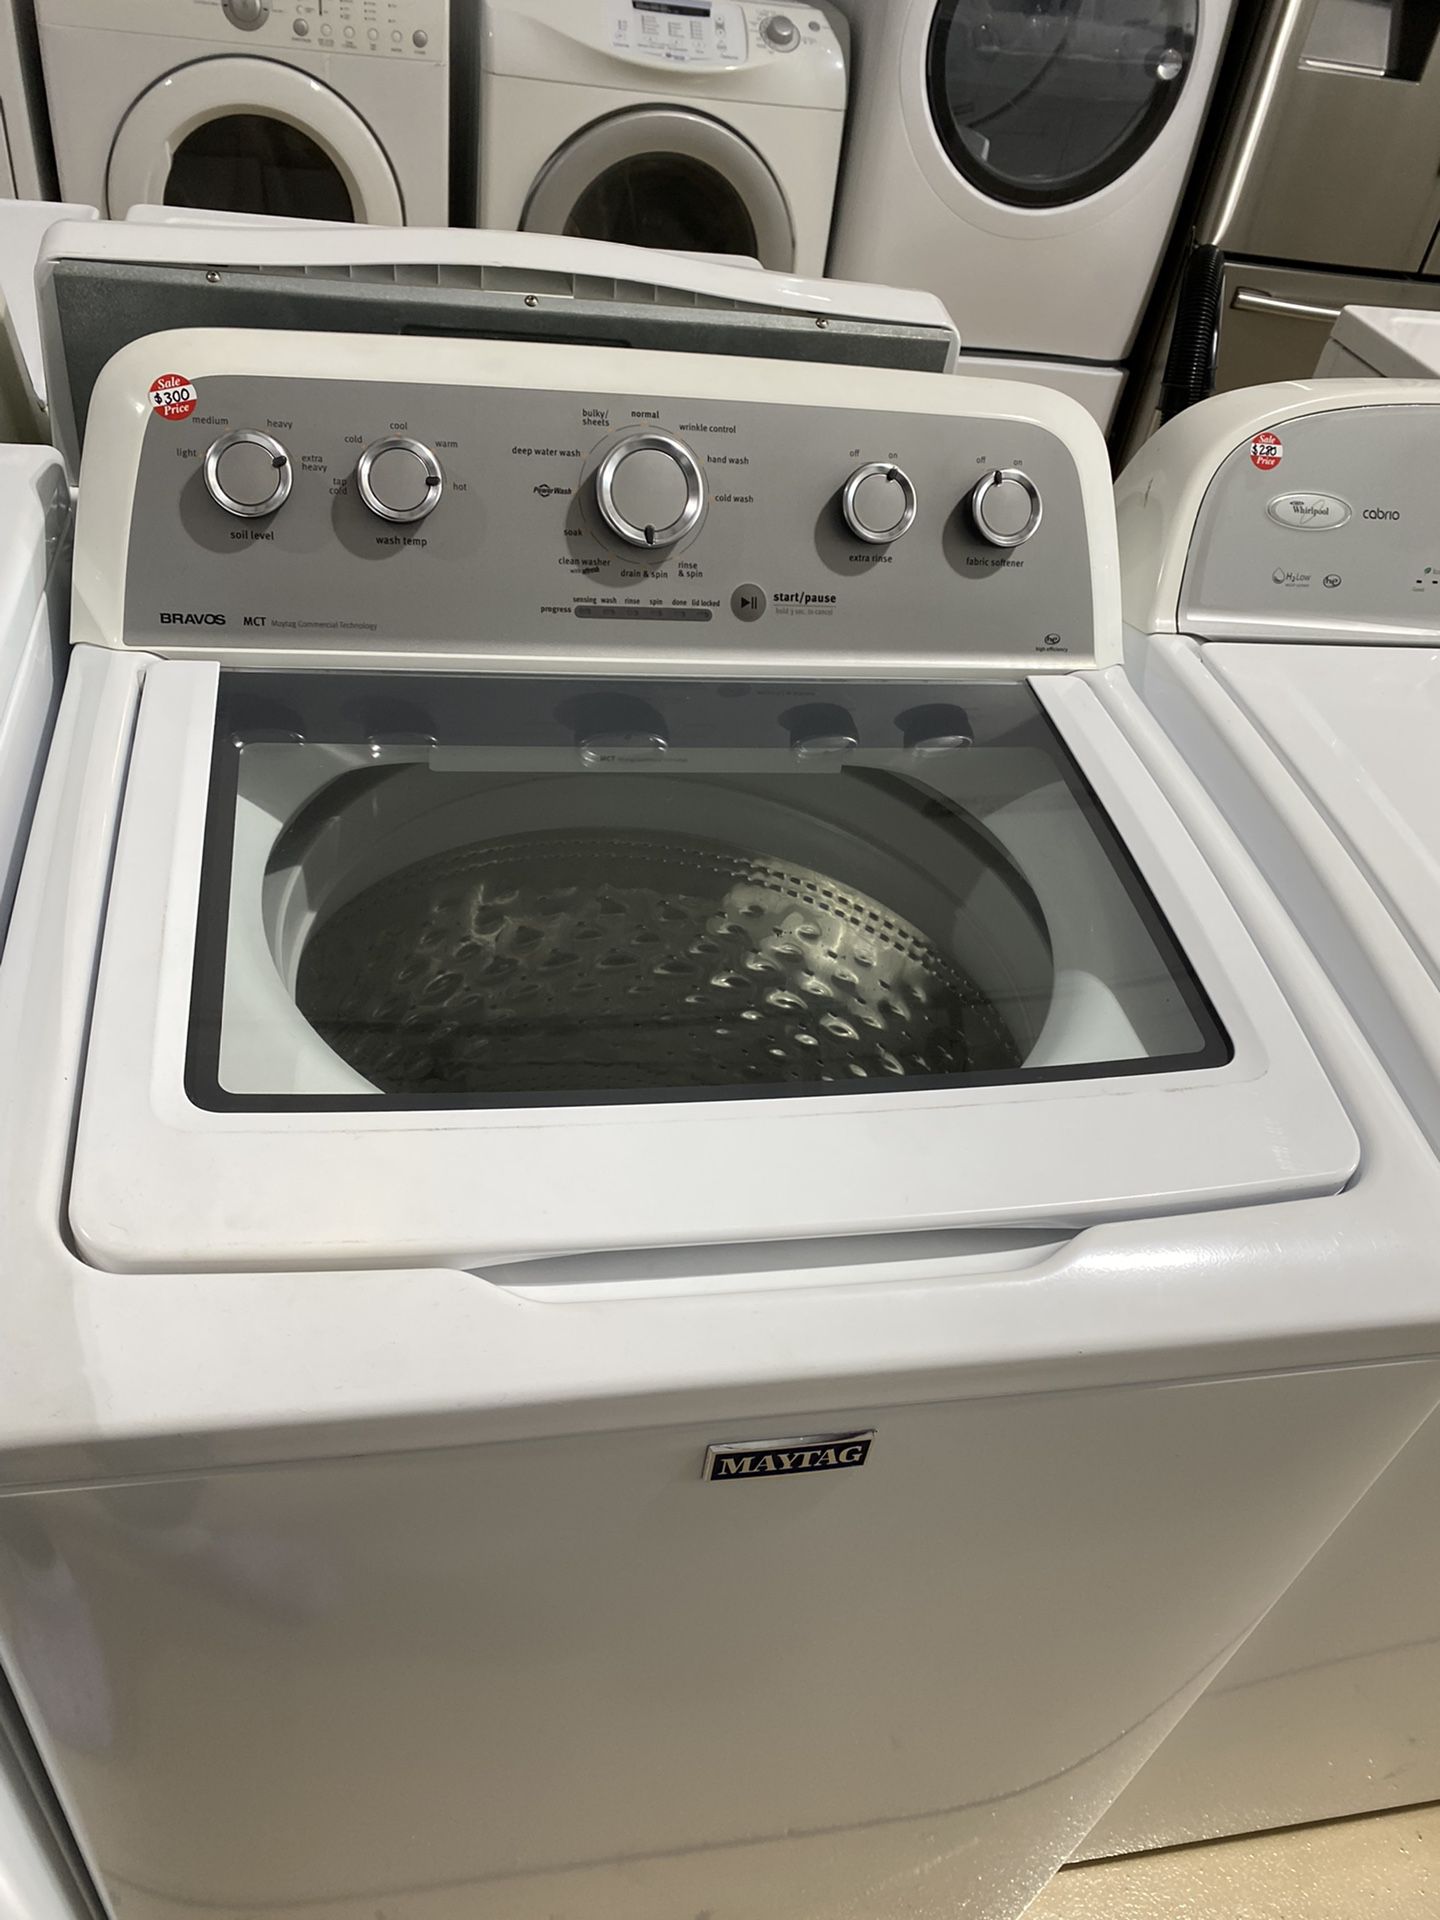 Washer Maytag Top Load 